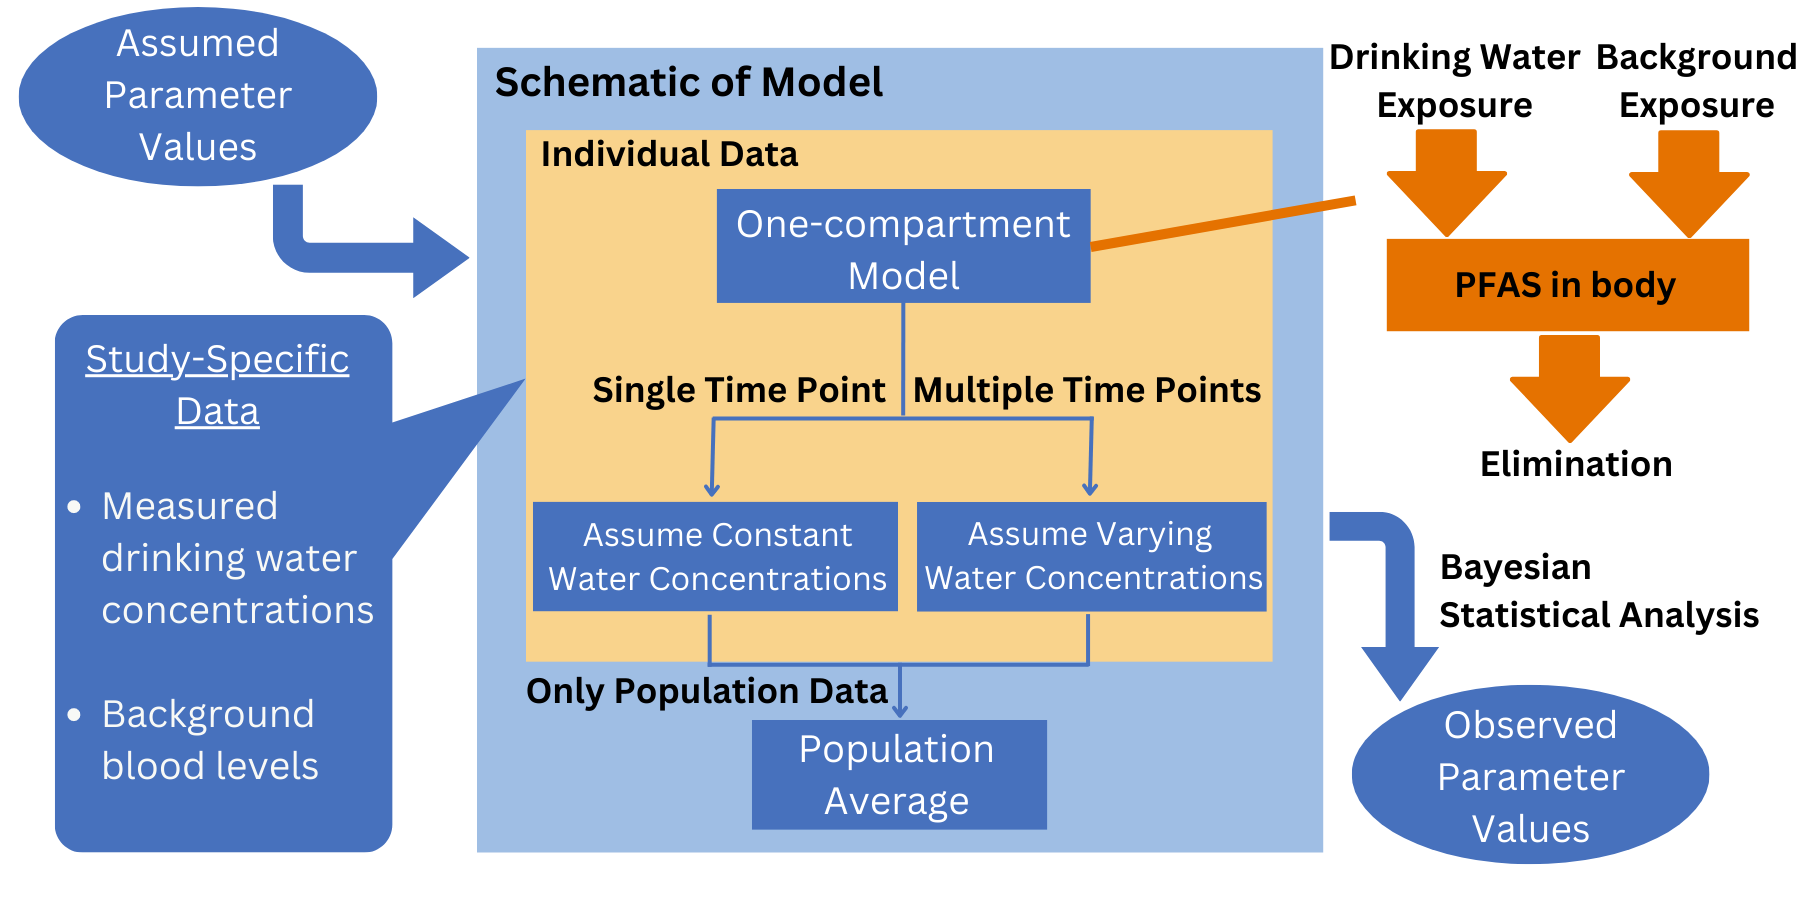 Schematic of modeling approach. A one-compartment pharmacokinetic model in the form of an ordinary differential equation (ODE) for serum concentration C(t) is the basis at the individual level. This model accounts for both drinking water exposure, as well as background exposure, and has parameters of body weight (BW), drinking water intake per unit BW (DWIBW), drinking water concentration (DWC, which can be function of time t), background serum concentration (Cbgd), elimination rate k, and volume of distribution Vd. If data are only at a single time point, then steady state is assumed, whereas if there are data at multiple time points, the ODEs are solved numerically. If only summary data are available, then the population mean is predicted for comparison. The Bayesian calibration uses prior distributions for each parameter, some of which are study specific. Markov chain Monte Carlo (MCMC) simulations are used to generate posterior distributions for the population mean and population geometric standard deviation for each parameter. See the “Methods” section for additional details.